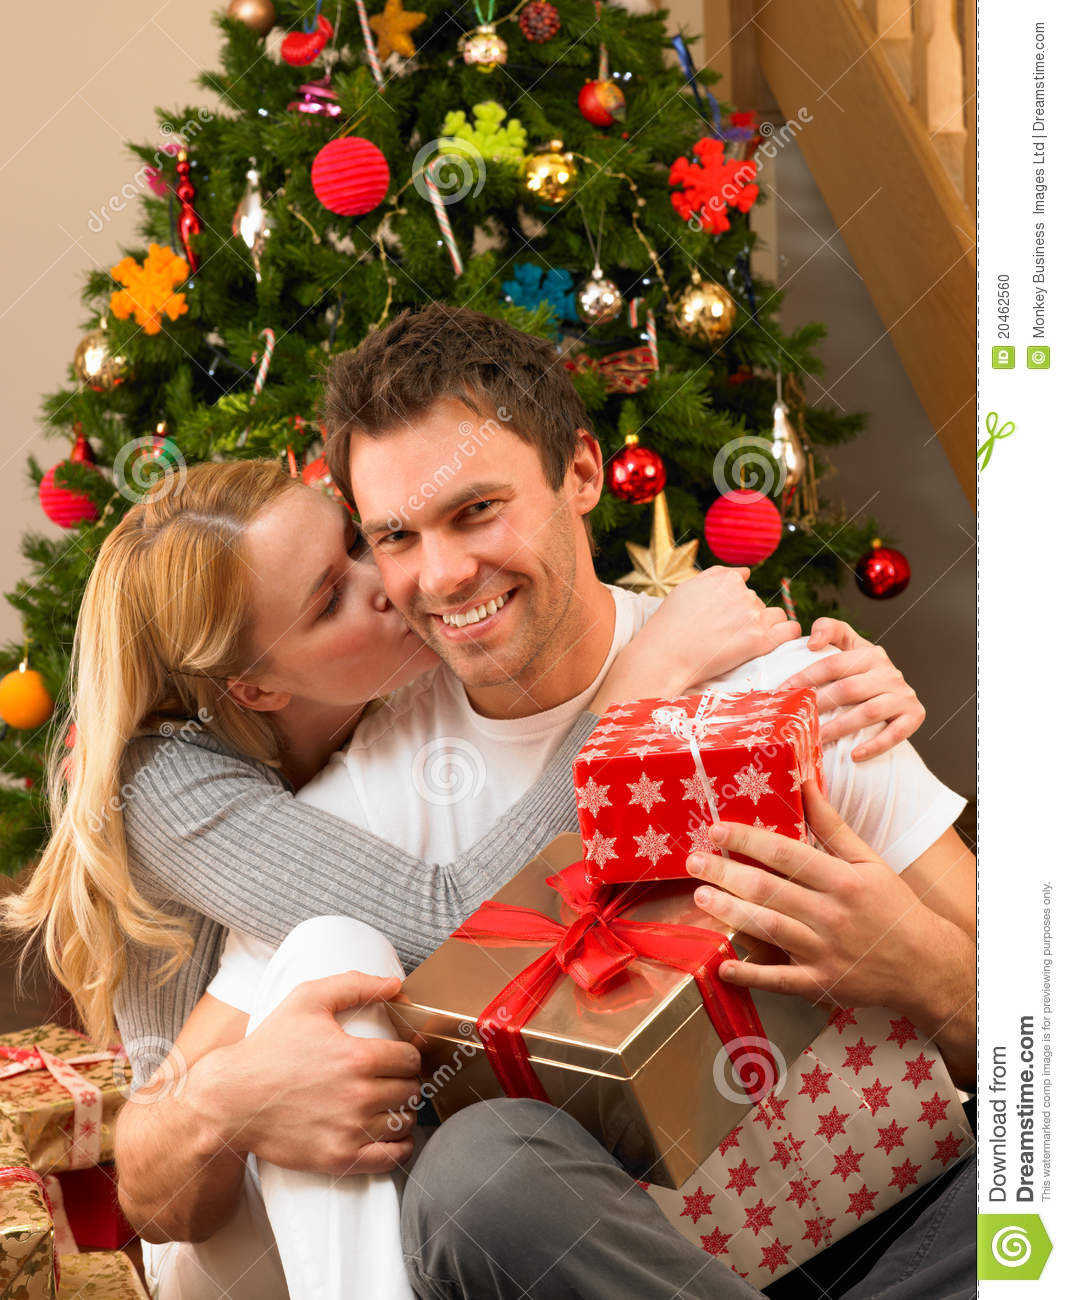 Gift Ideas For Young Couple
 Young Couple With Gifts In Front Christmas Tree Stock